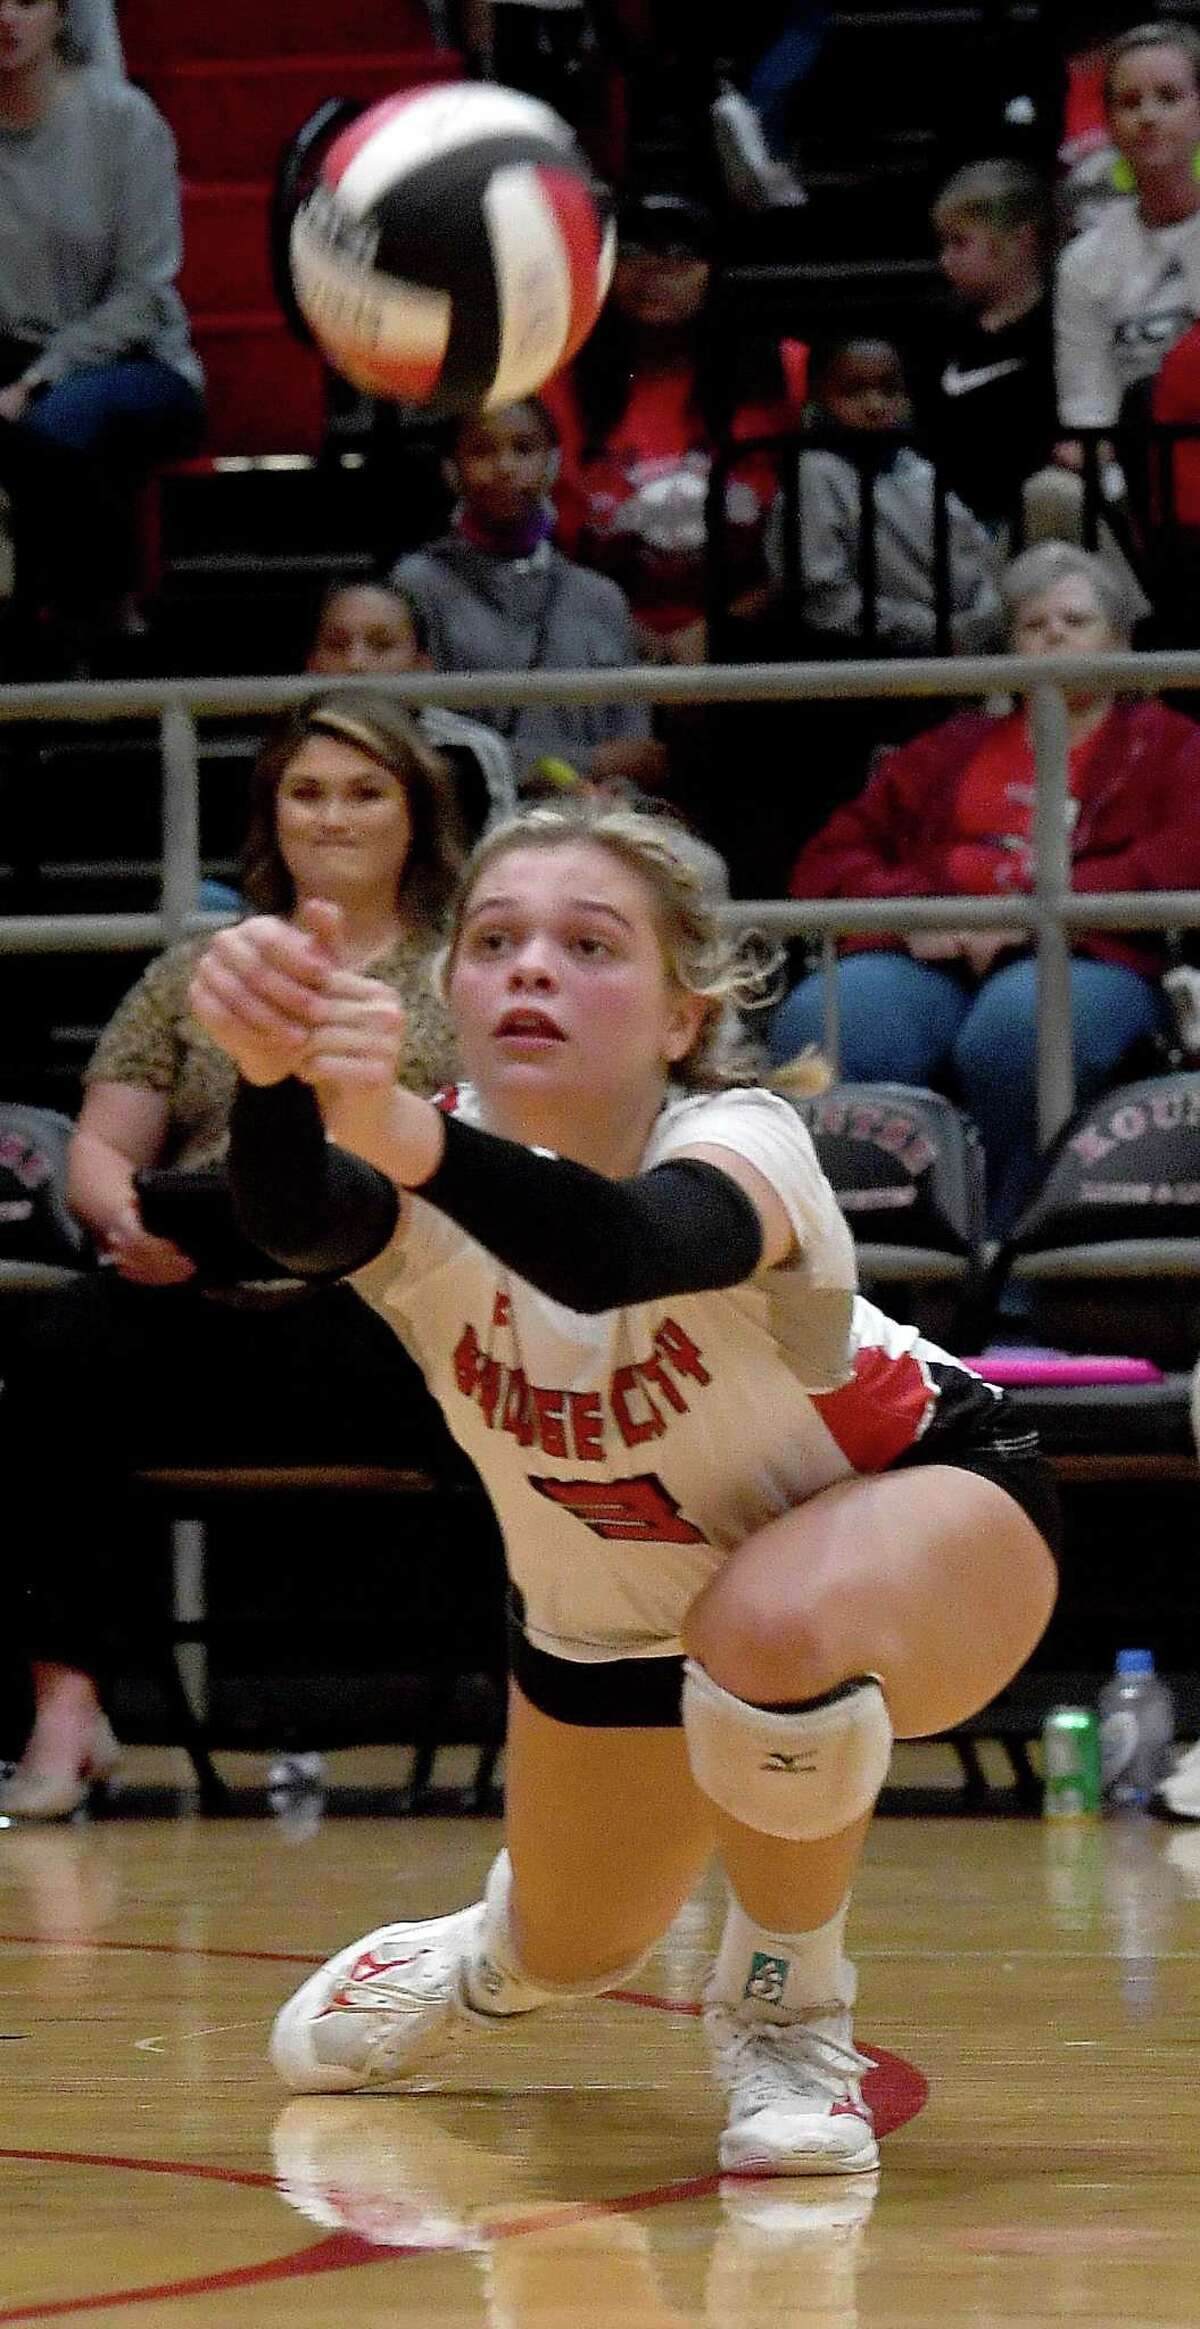 Bridge City's Harlee Tupper digs down to keep the ball alive as they battle Huffman-Hargrave during their regional quarterfinal playoff in Kountze. Photo made Tuesday, November 9, 2021 Kim Brent/The Enterprise